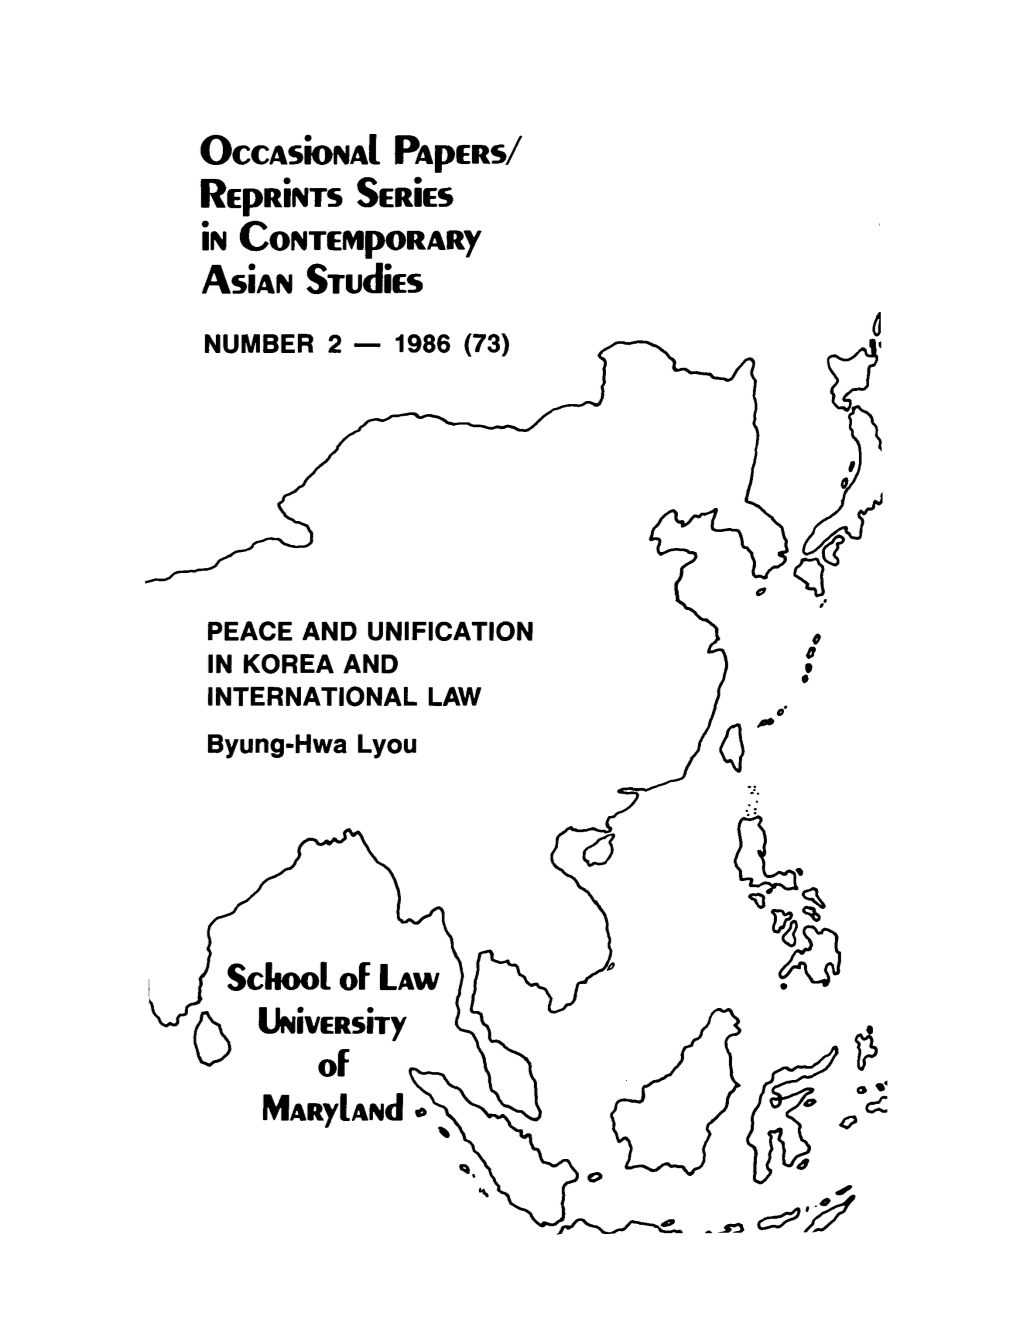 Peace and Unification in Korea and International Law